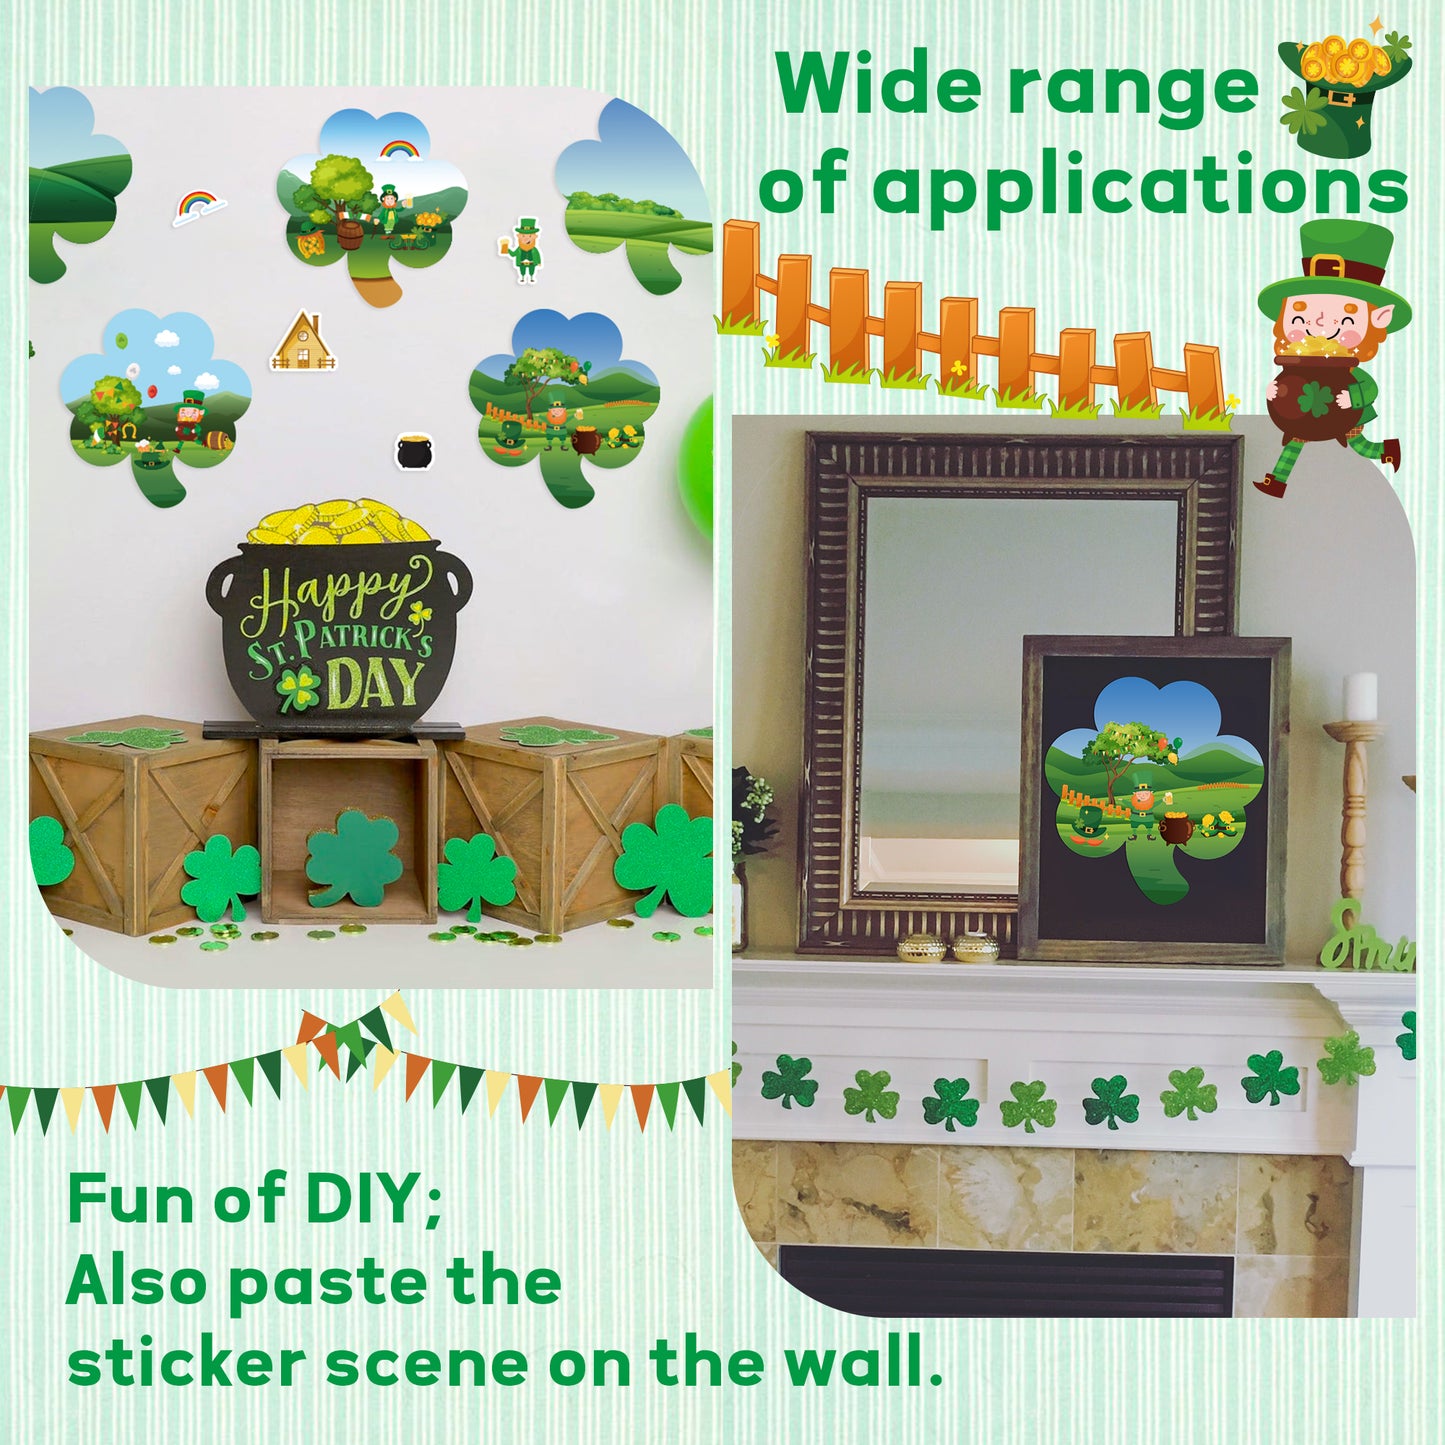 COcnny 24pcs Make a St. Patrick's Day Scene Sticker Craft, Make Your Own Scene Stickers for Saint Patrick’s Day, Shamrock Irish Lucky Clover DIY Art Labels, Classroom Kids Game  Party Goodies Favor